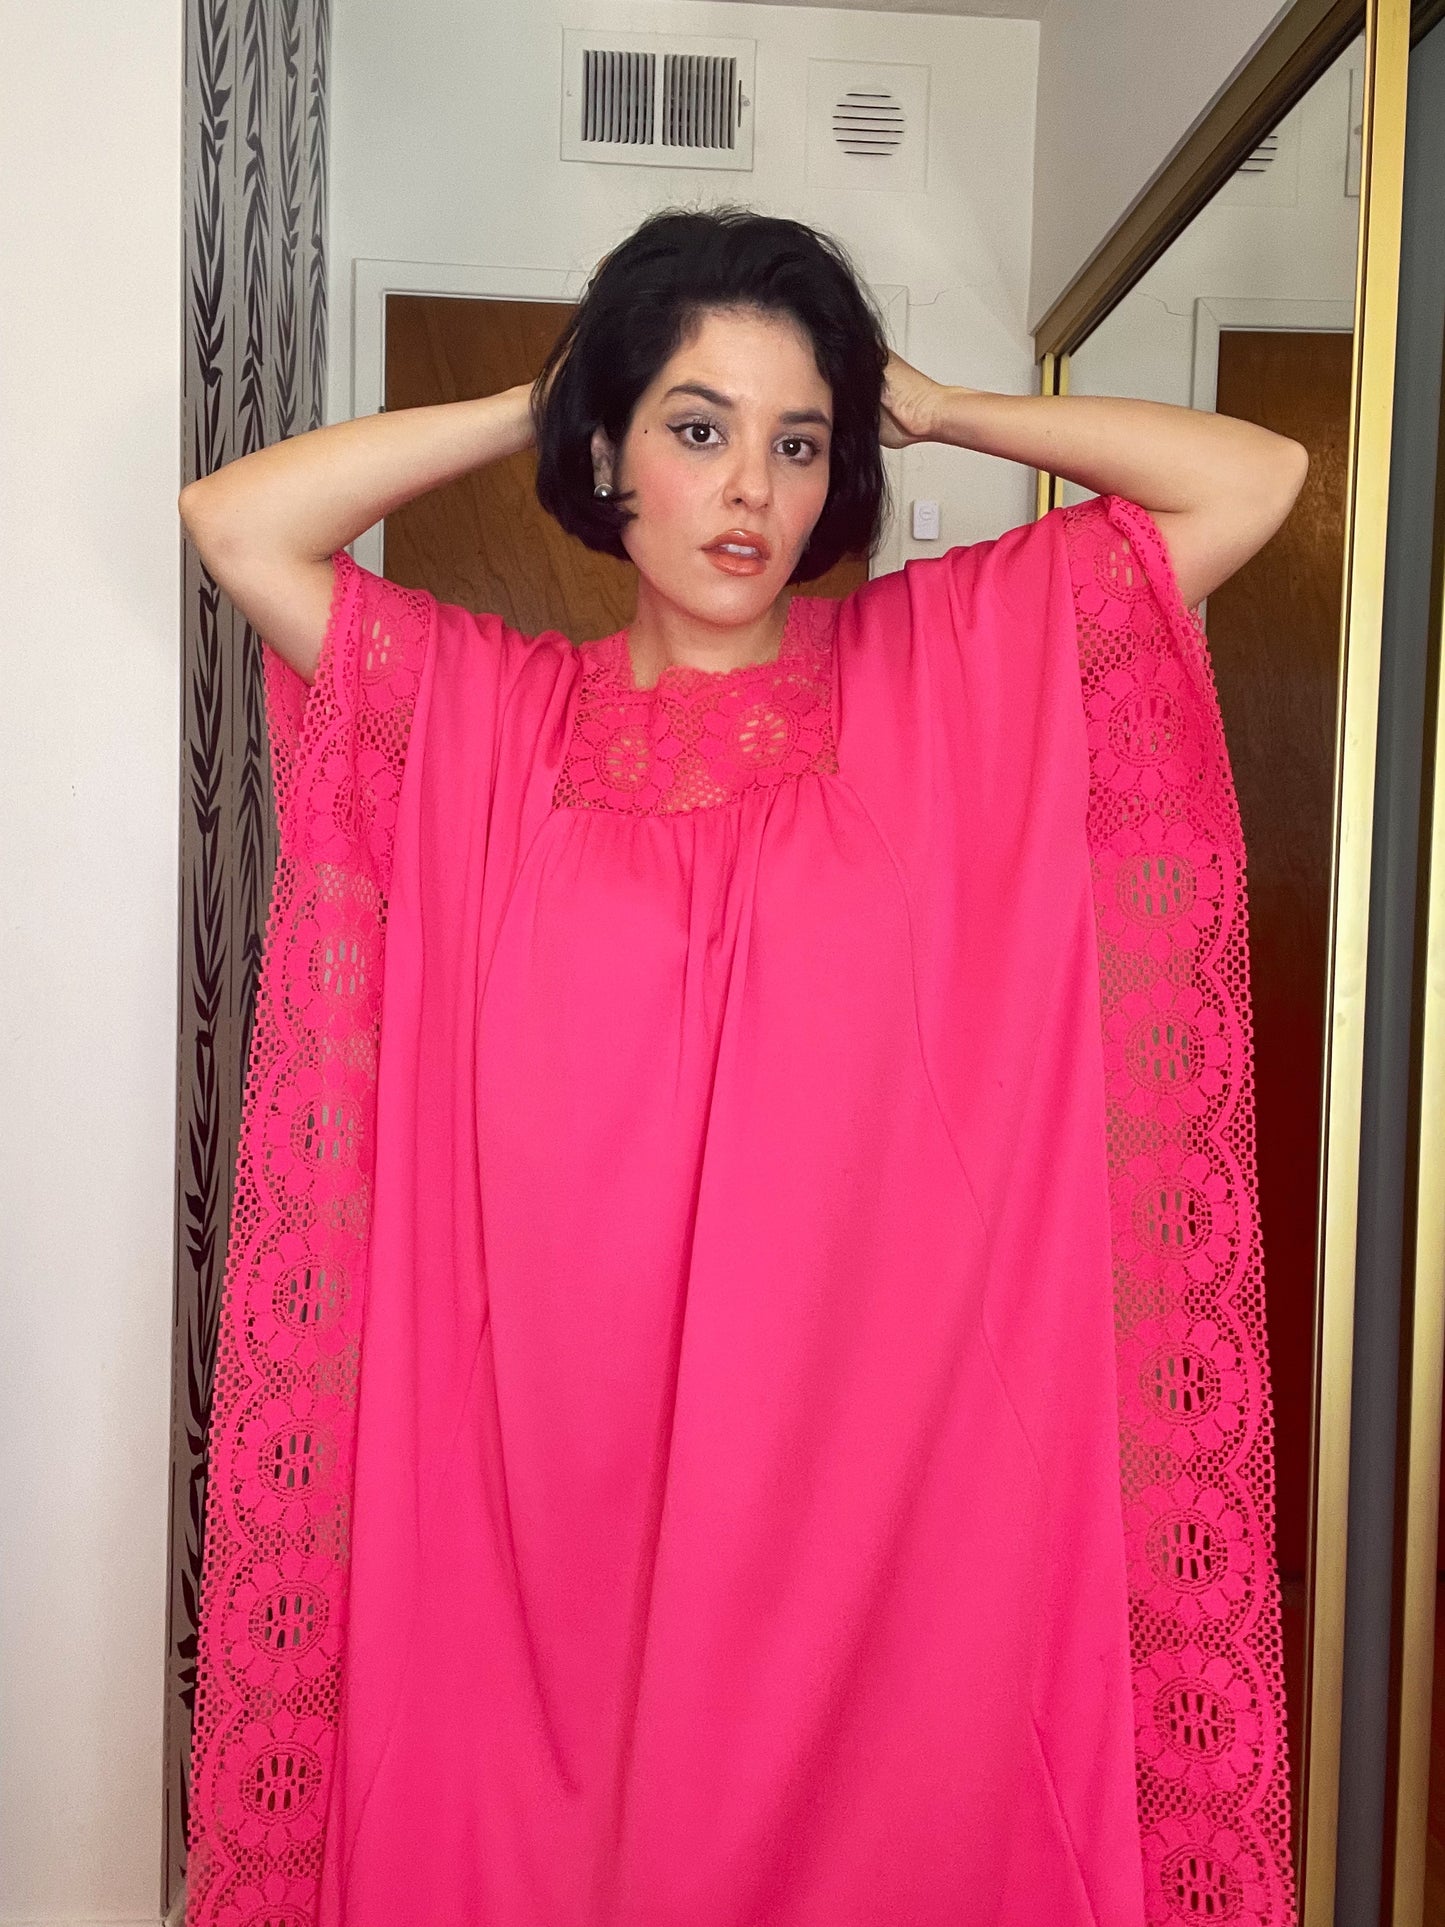 Vintage 60s / 70s Hot Pink Caftan Maxi Fits Most Sizes